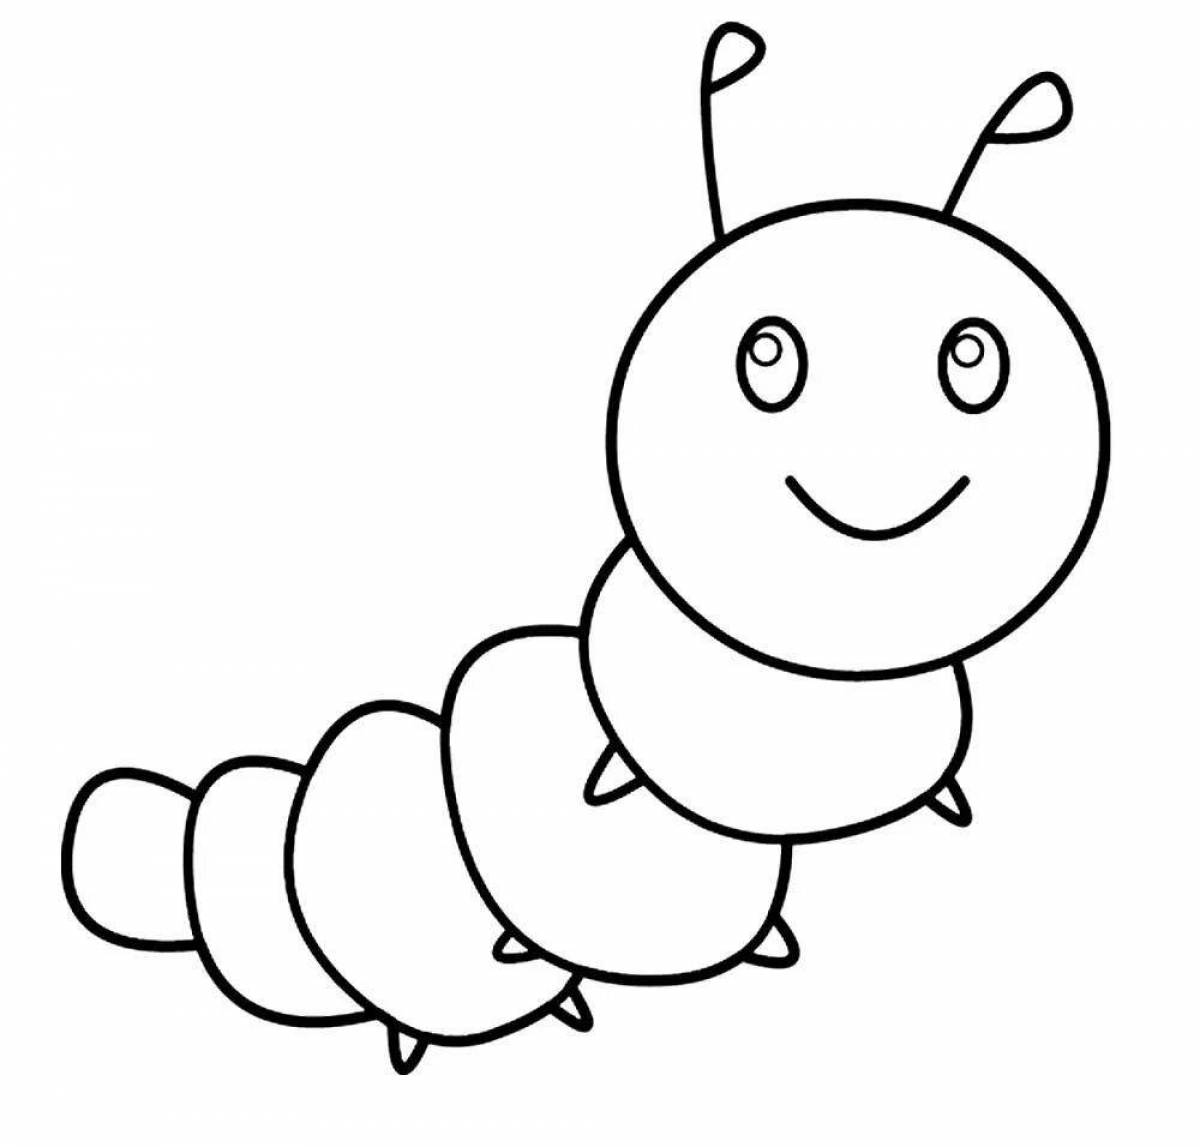 Perfect caterpillar coloring page for kids